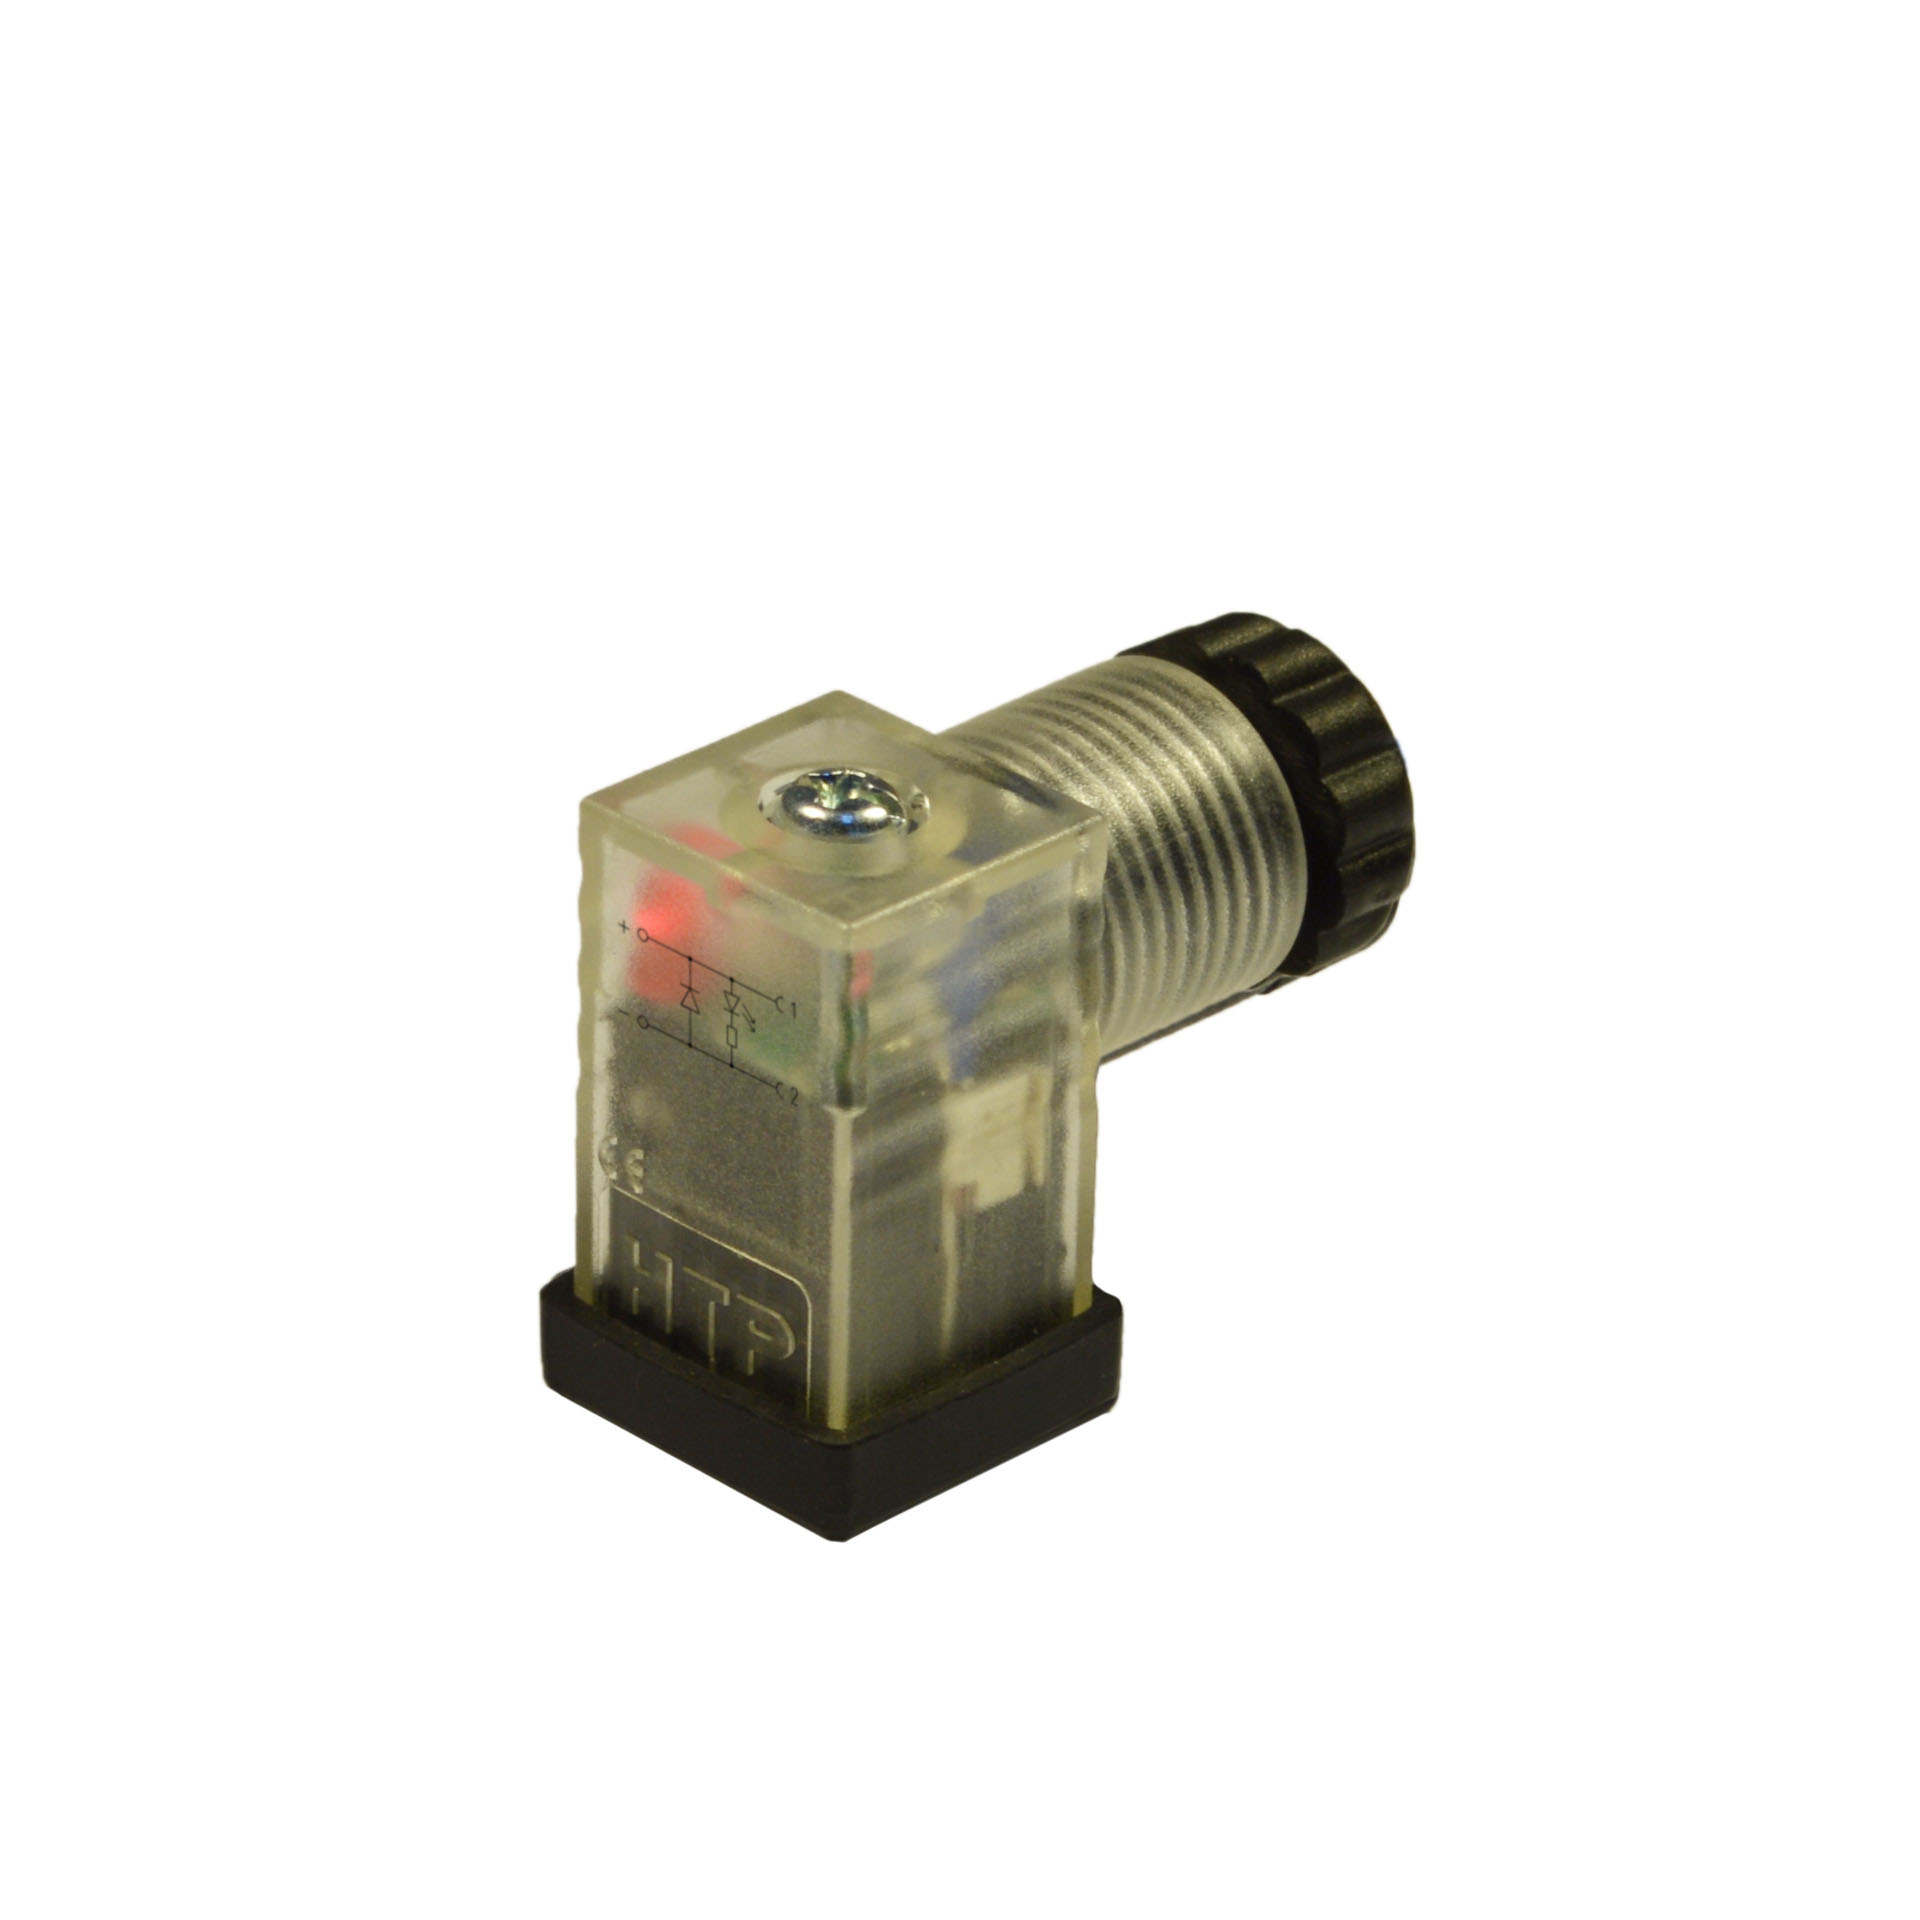 EN175301-803(typeC)field attachable,2p+PE(h.6),red LED+diode,230VDC,PG7